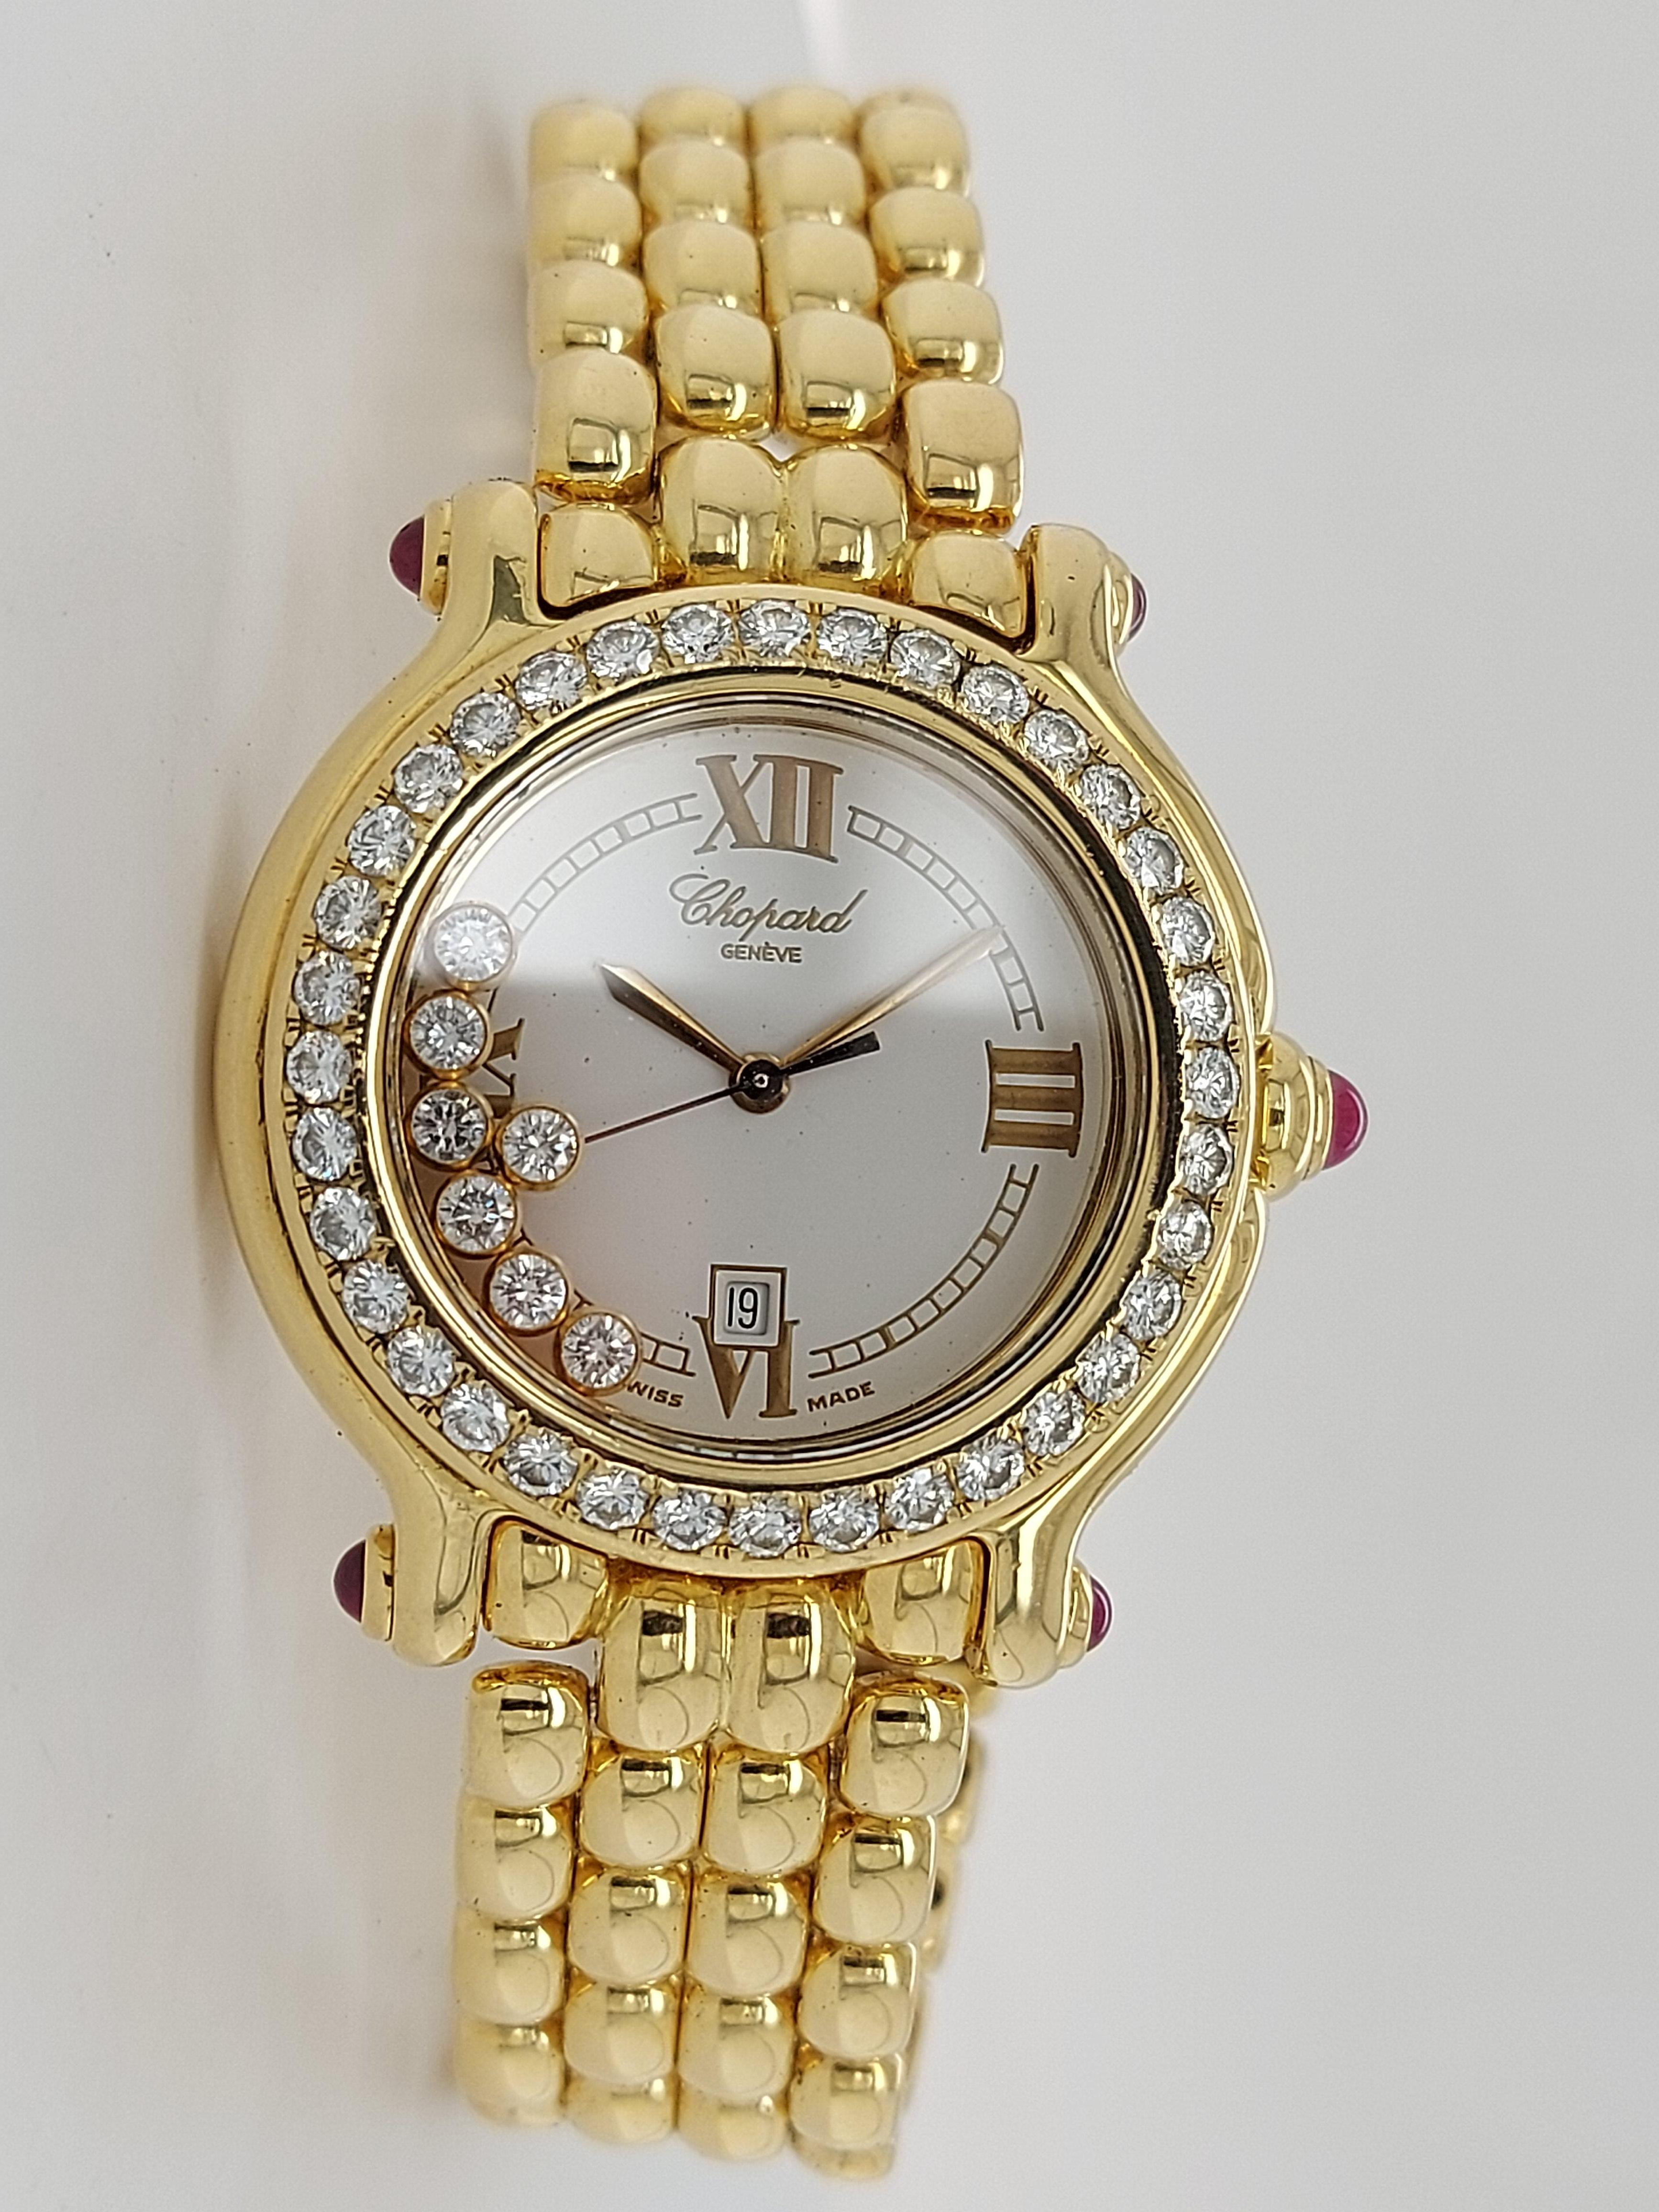 Condition: Like New 
Gender: Ladies
Dial Color: White 7 Floating Diamonds
Case: 18k Yellow Gold 32 mm
Bracelet: 18k solid Yellow Gold,to fit a 17 cm wrist.(links can be ordered if needed bigger size)
Bezel: 18k Yellow Gold Diamond Set By